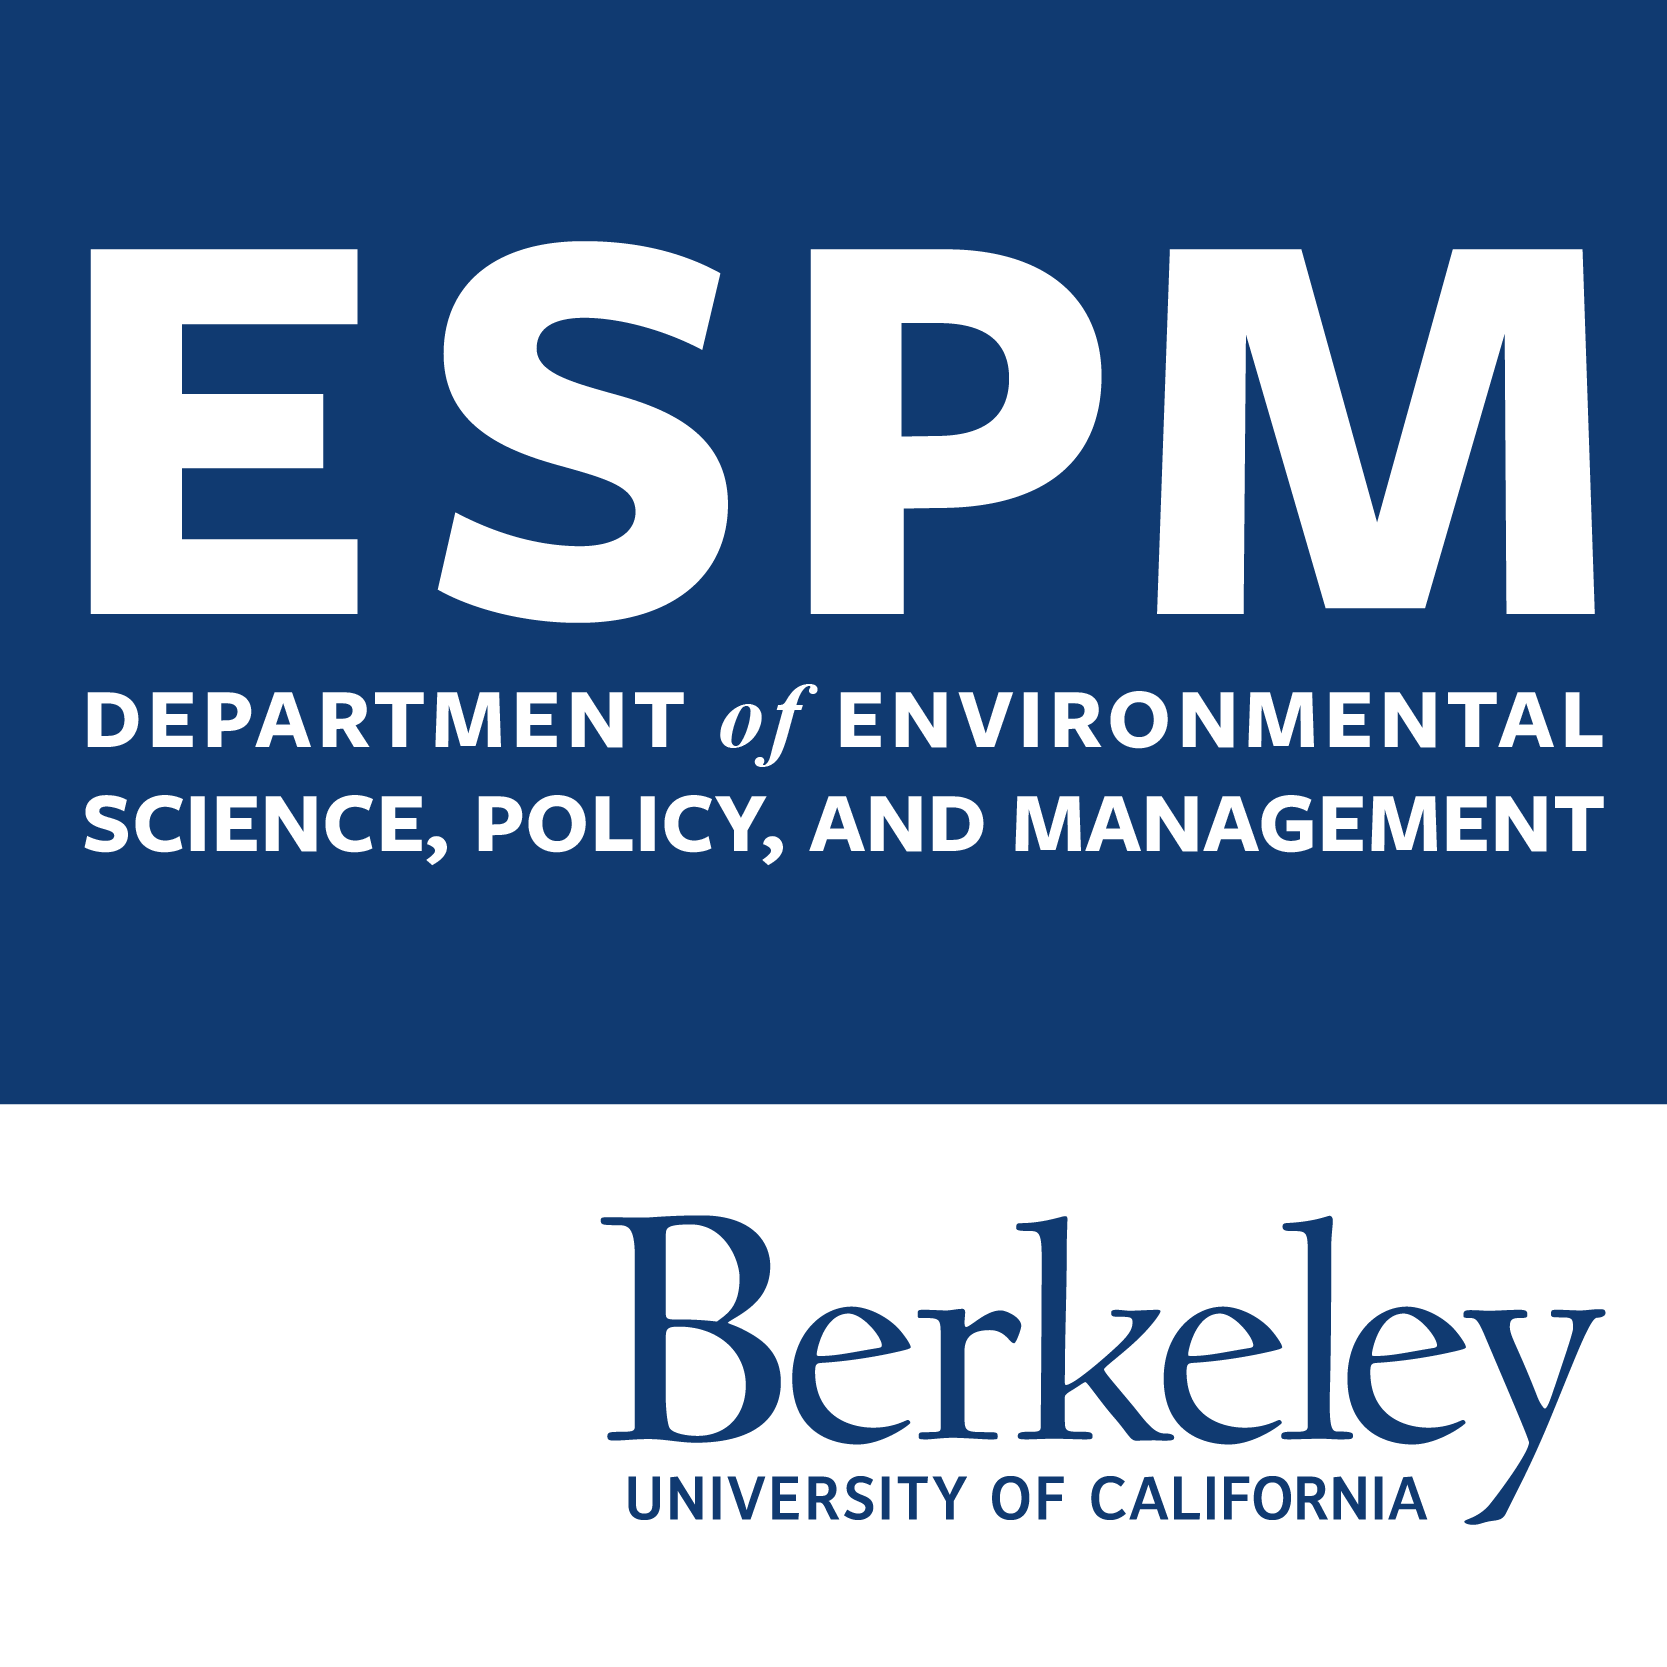 The official Twitter account for the Department of Environmental Science, Policy, & Management at UC Berkeley.